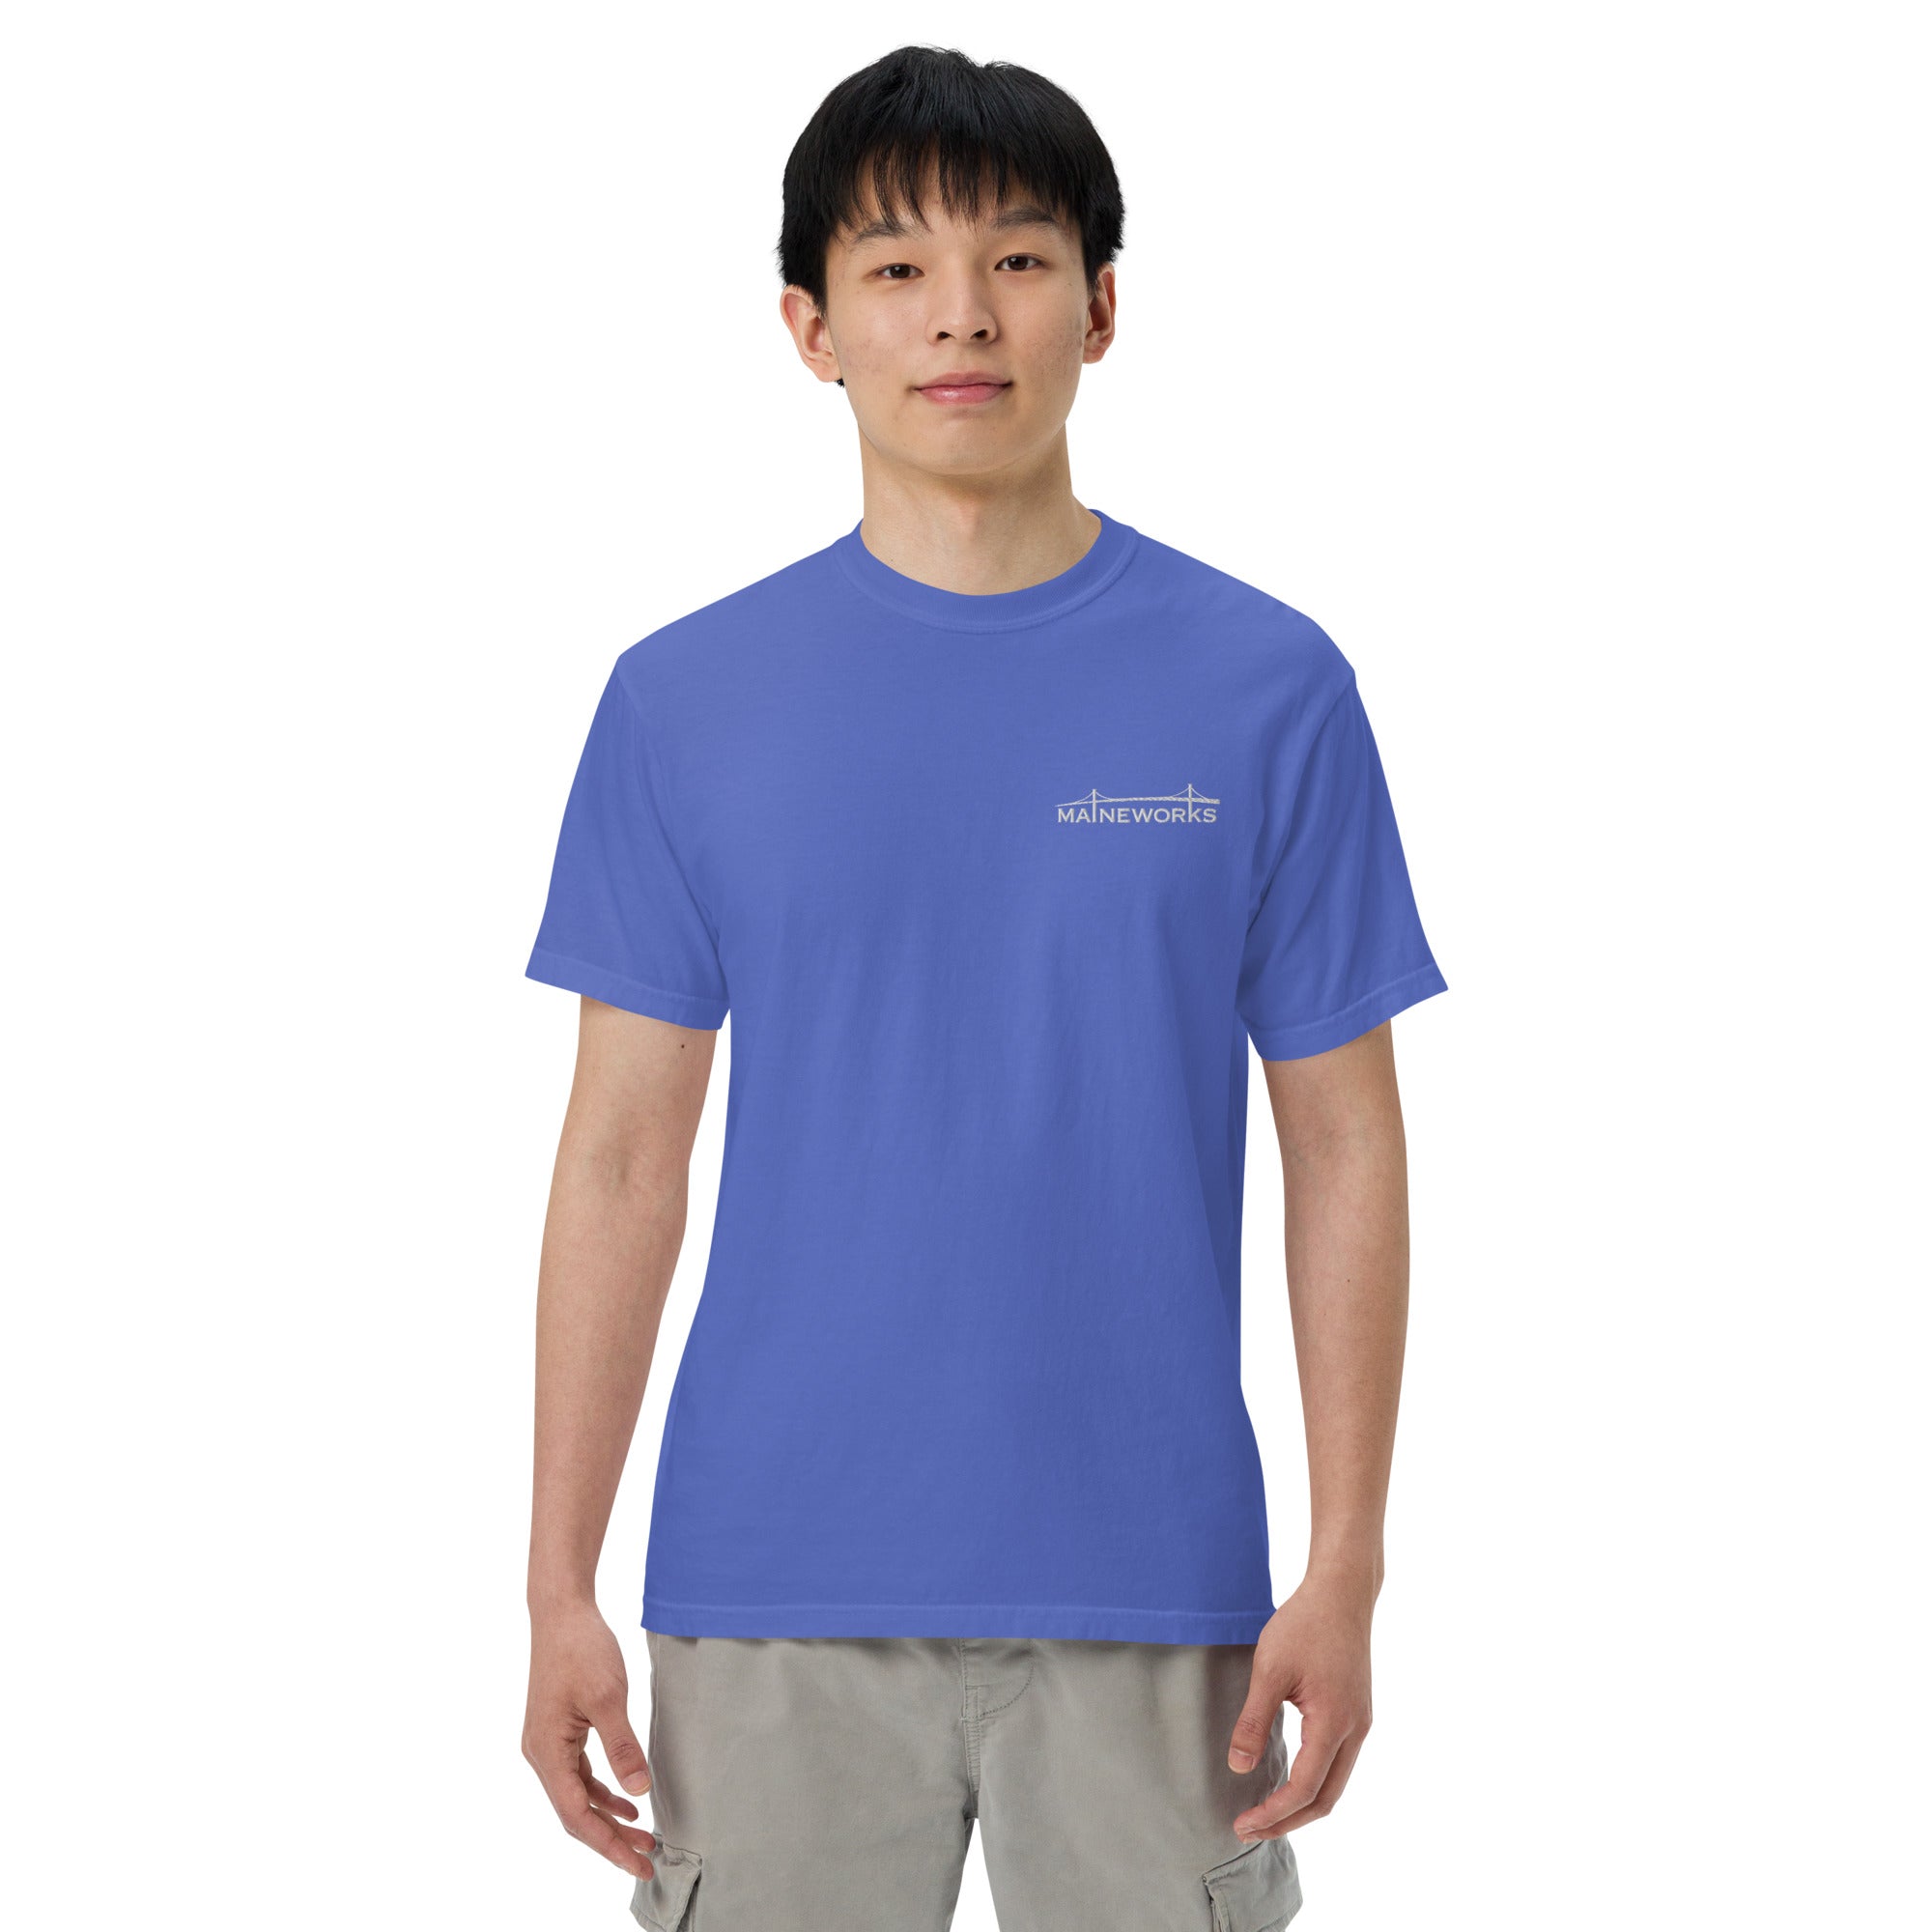 MaineWorks Comfort Colors embroidered t-shirt (this one is NICE)